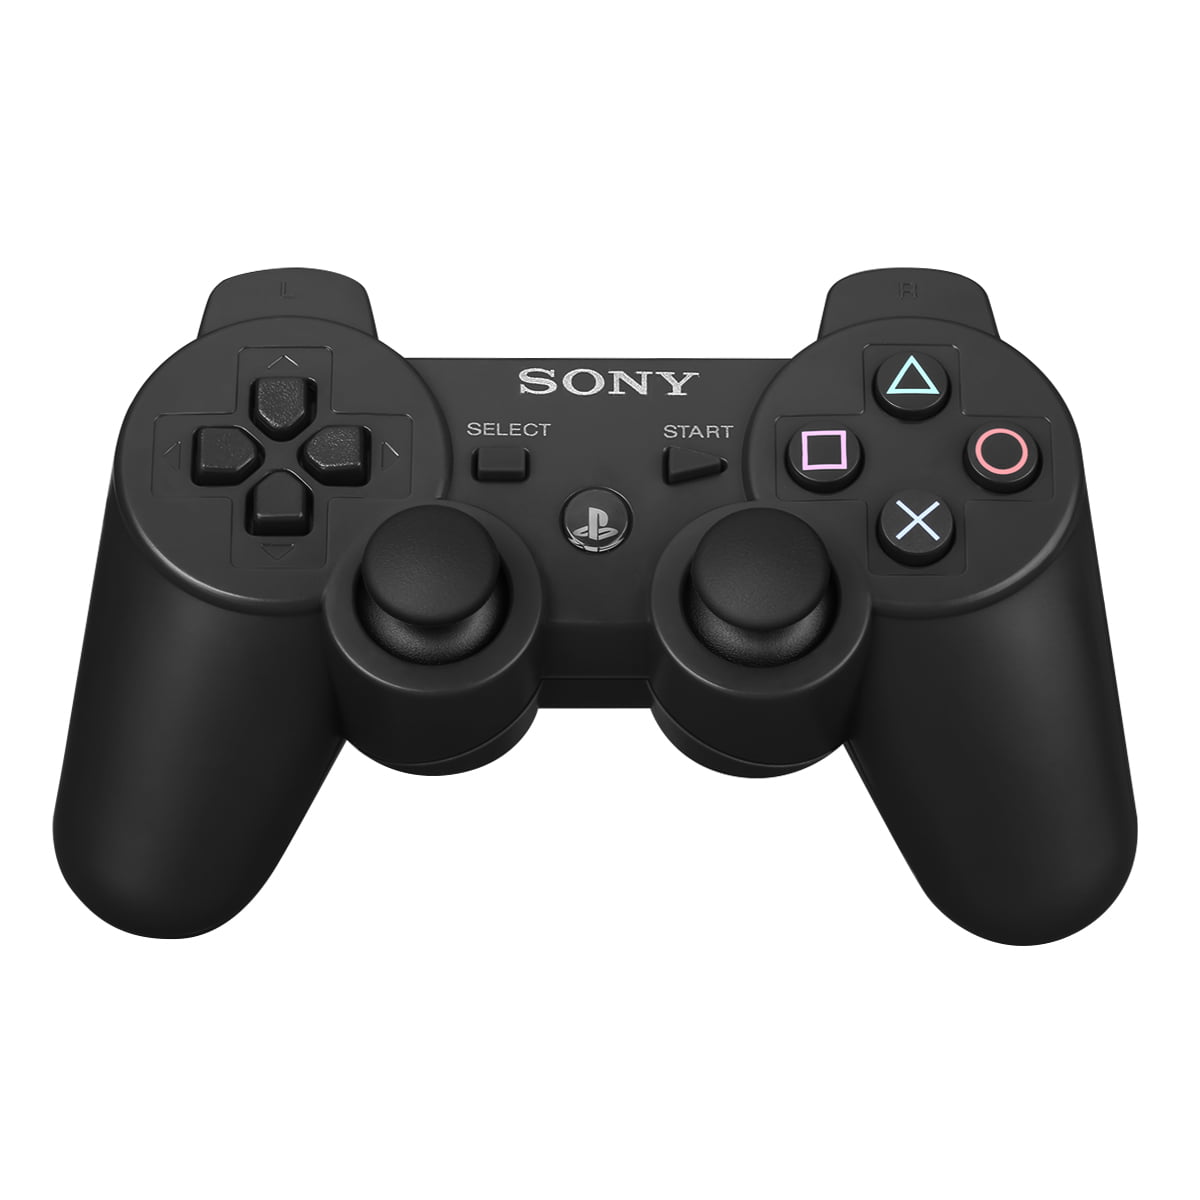 ps3 controller on pcsx2